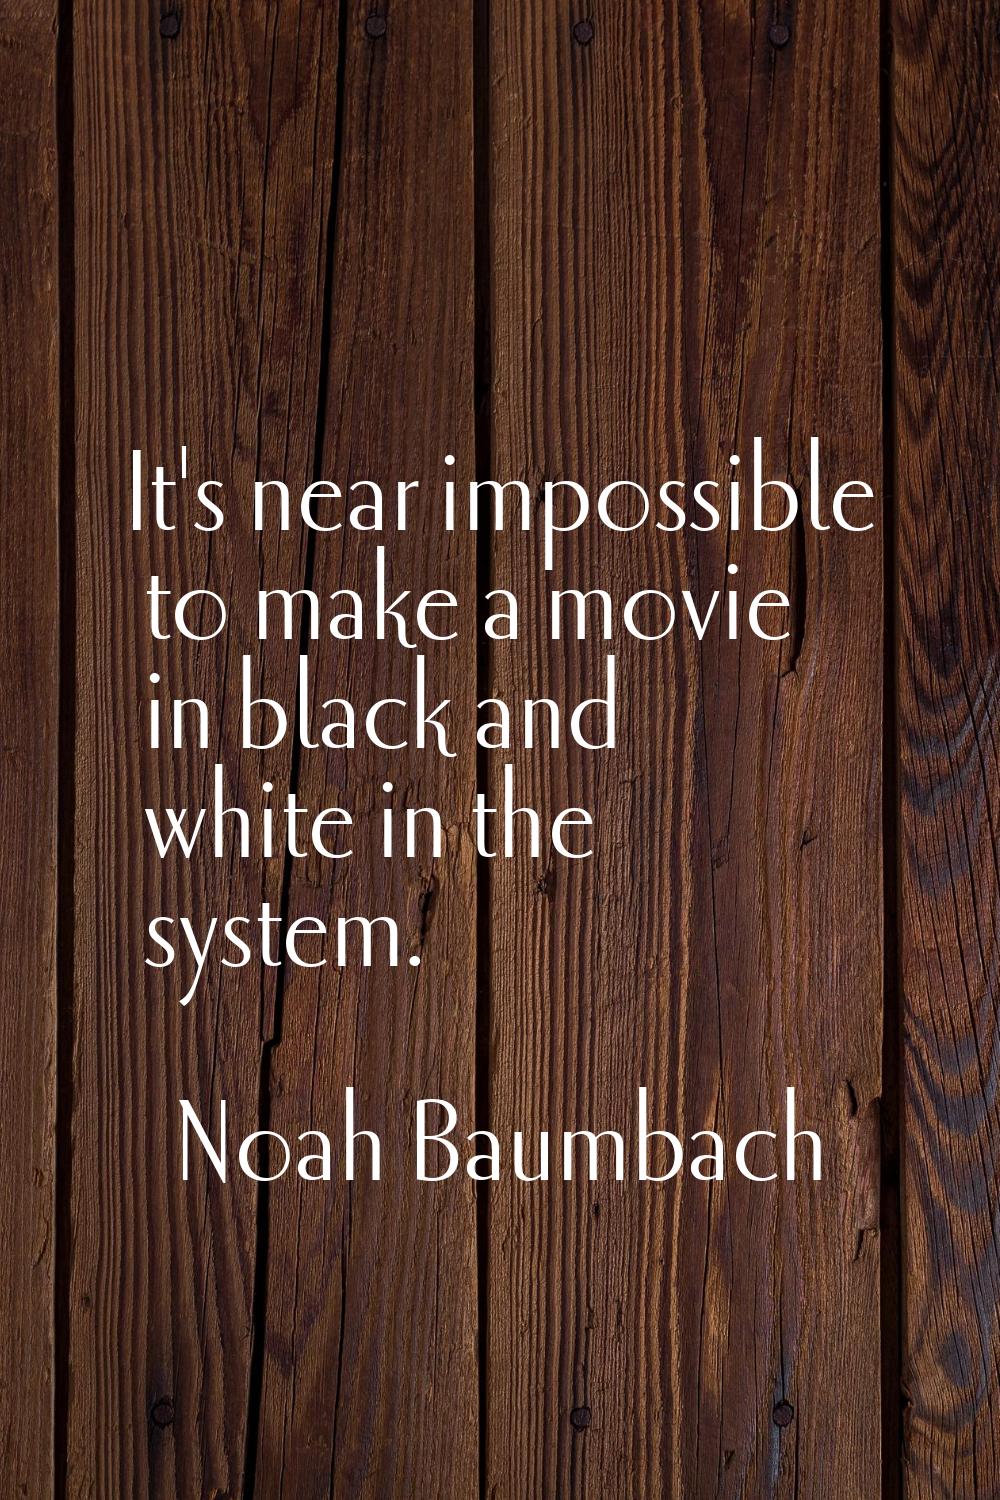 It's near impossible to make a movie in black and white in the system.